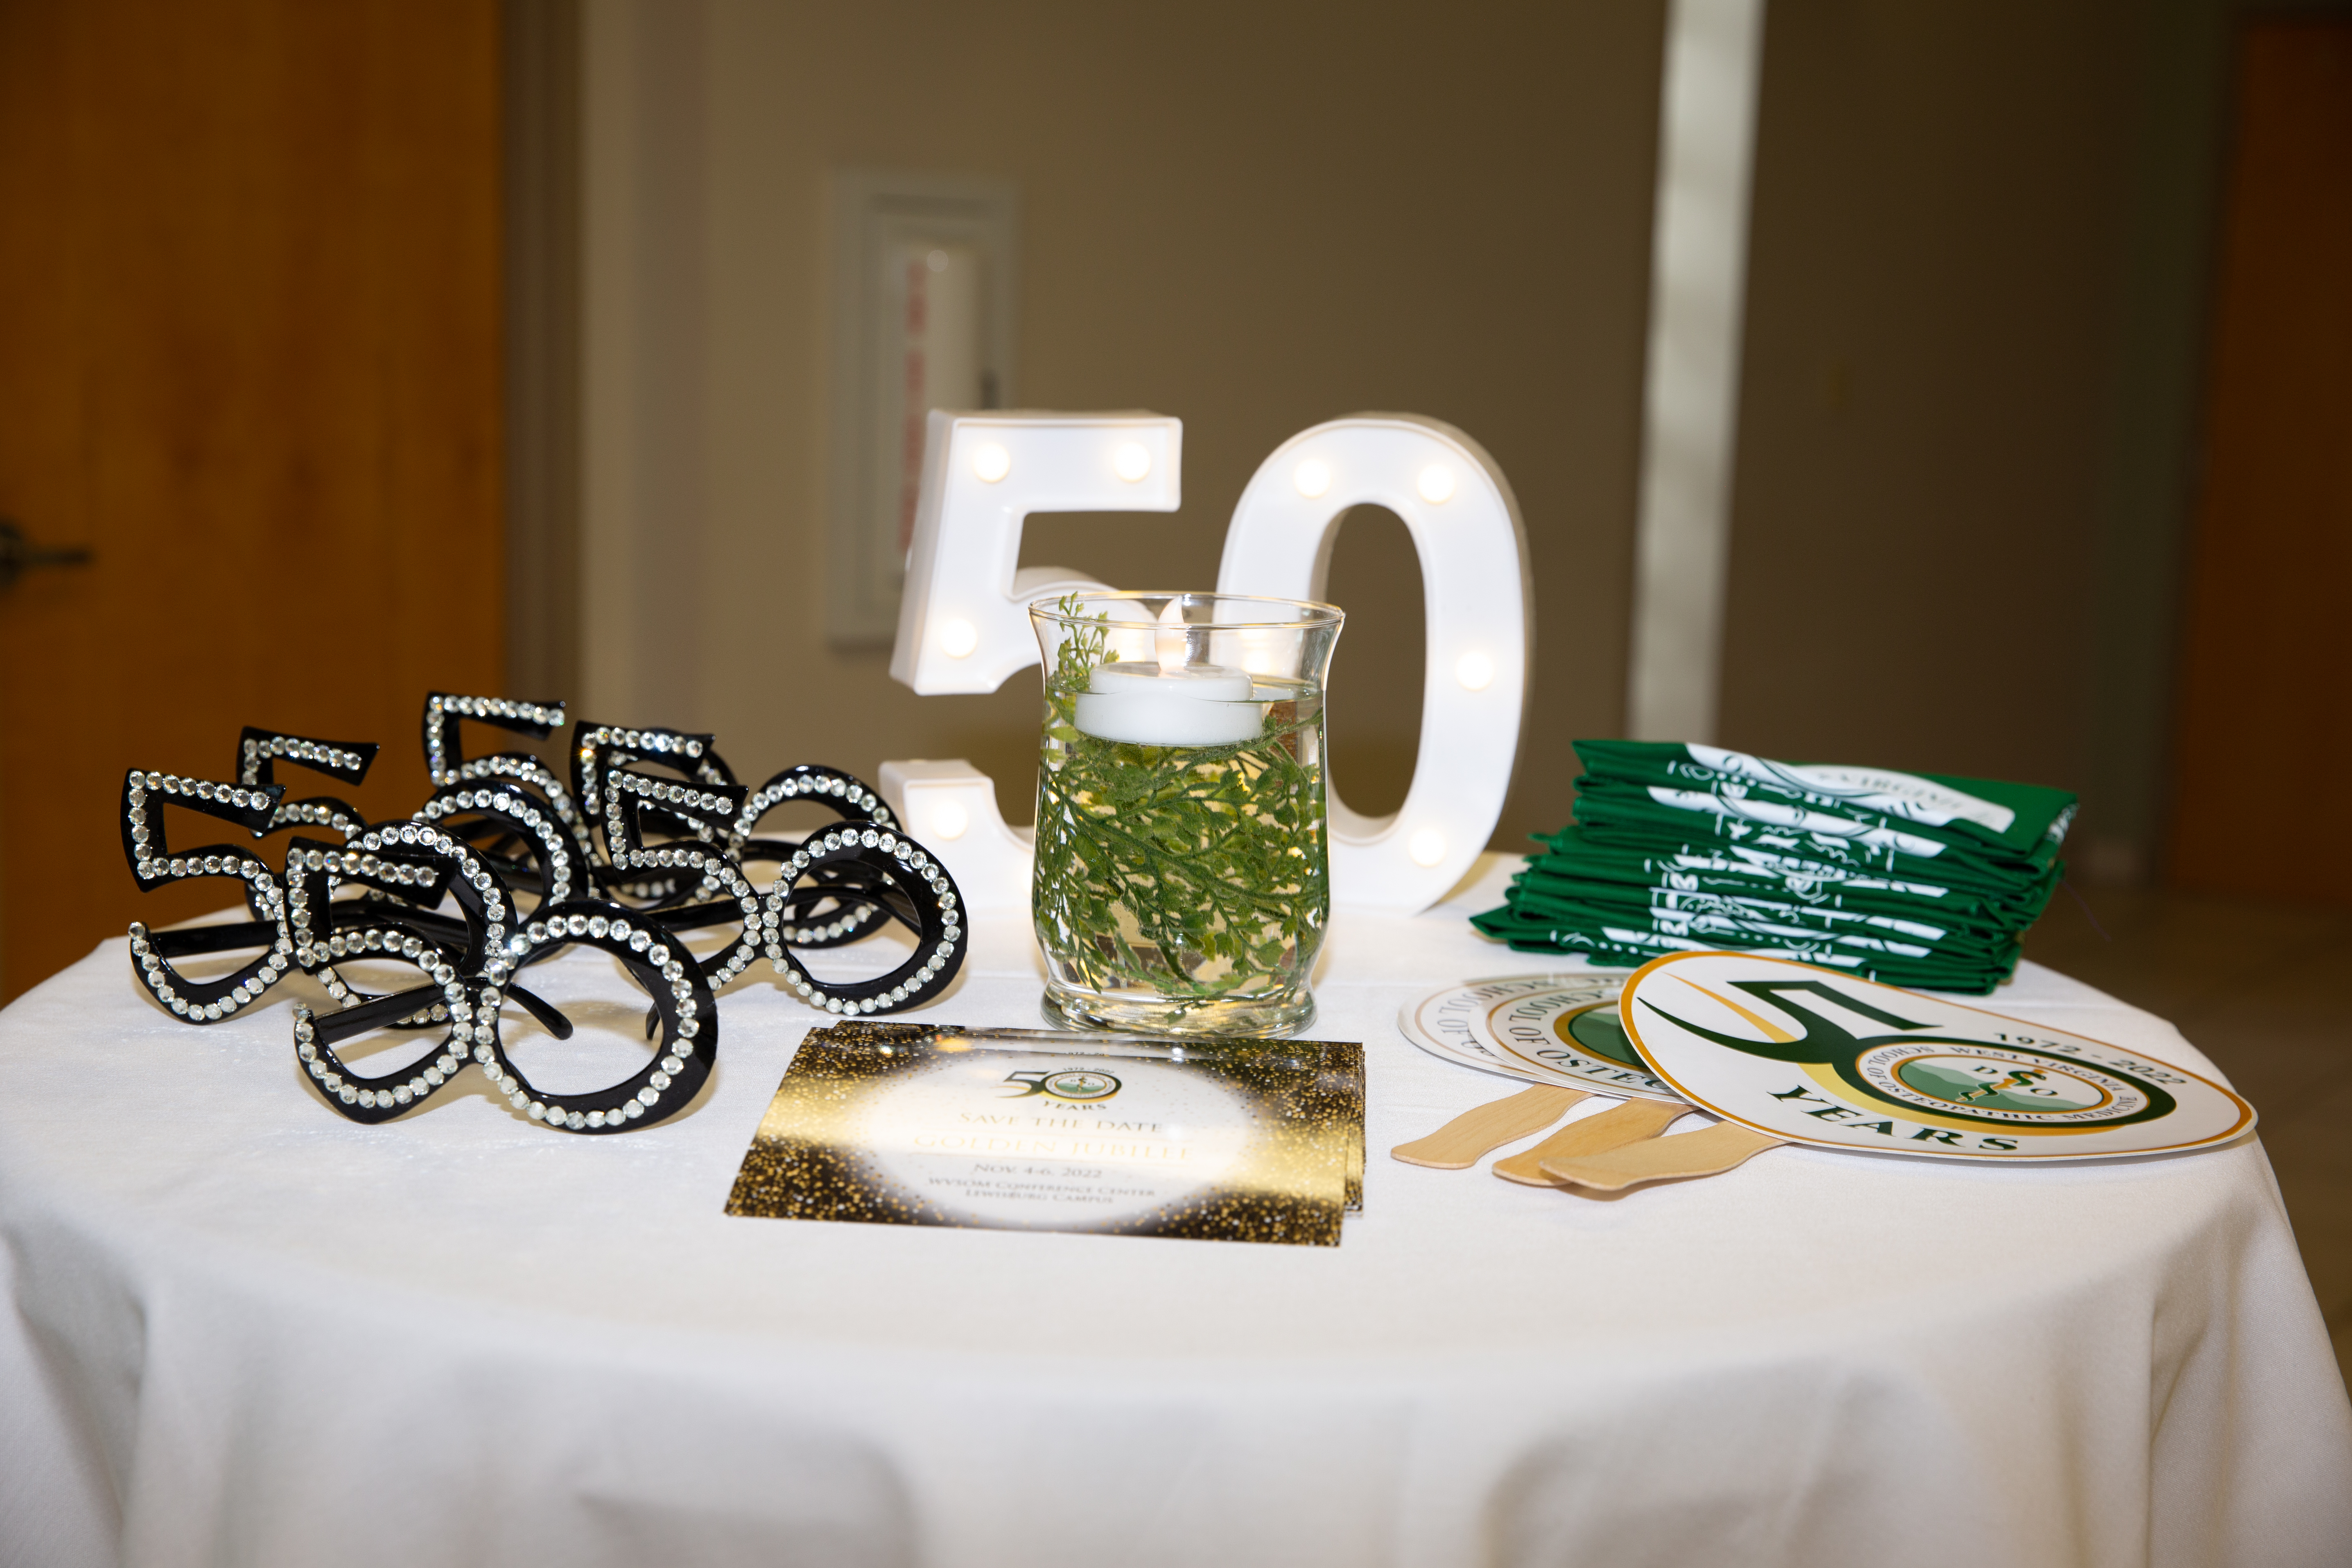 50th event swag table, glasses, fans, brochures 